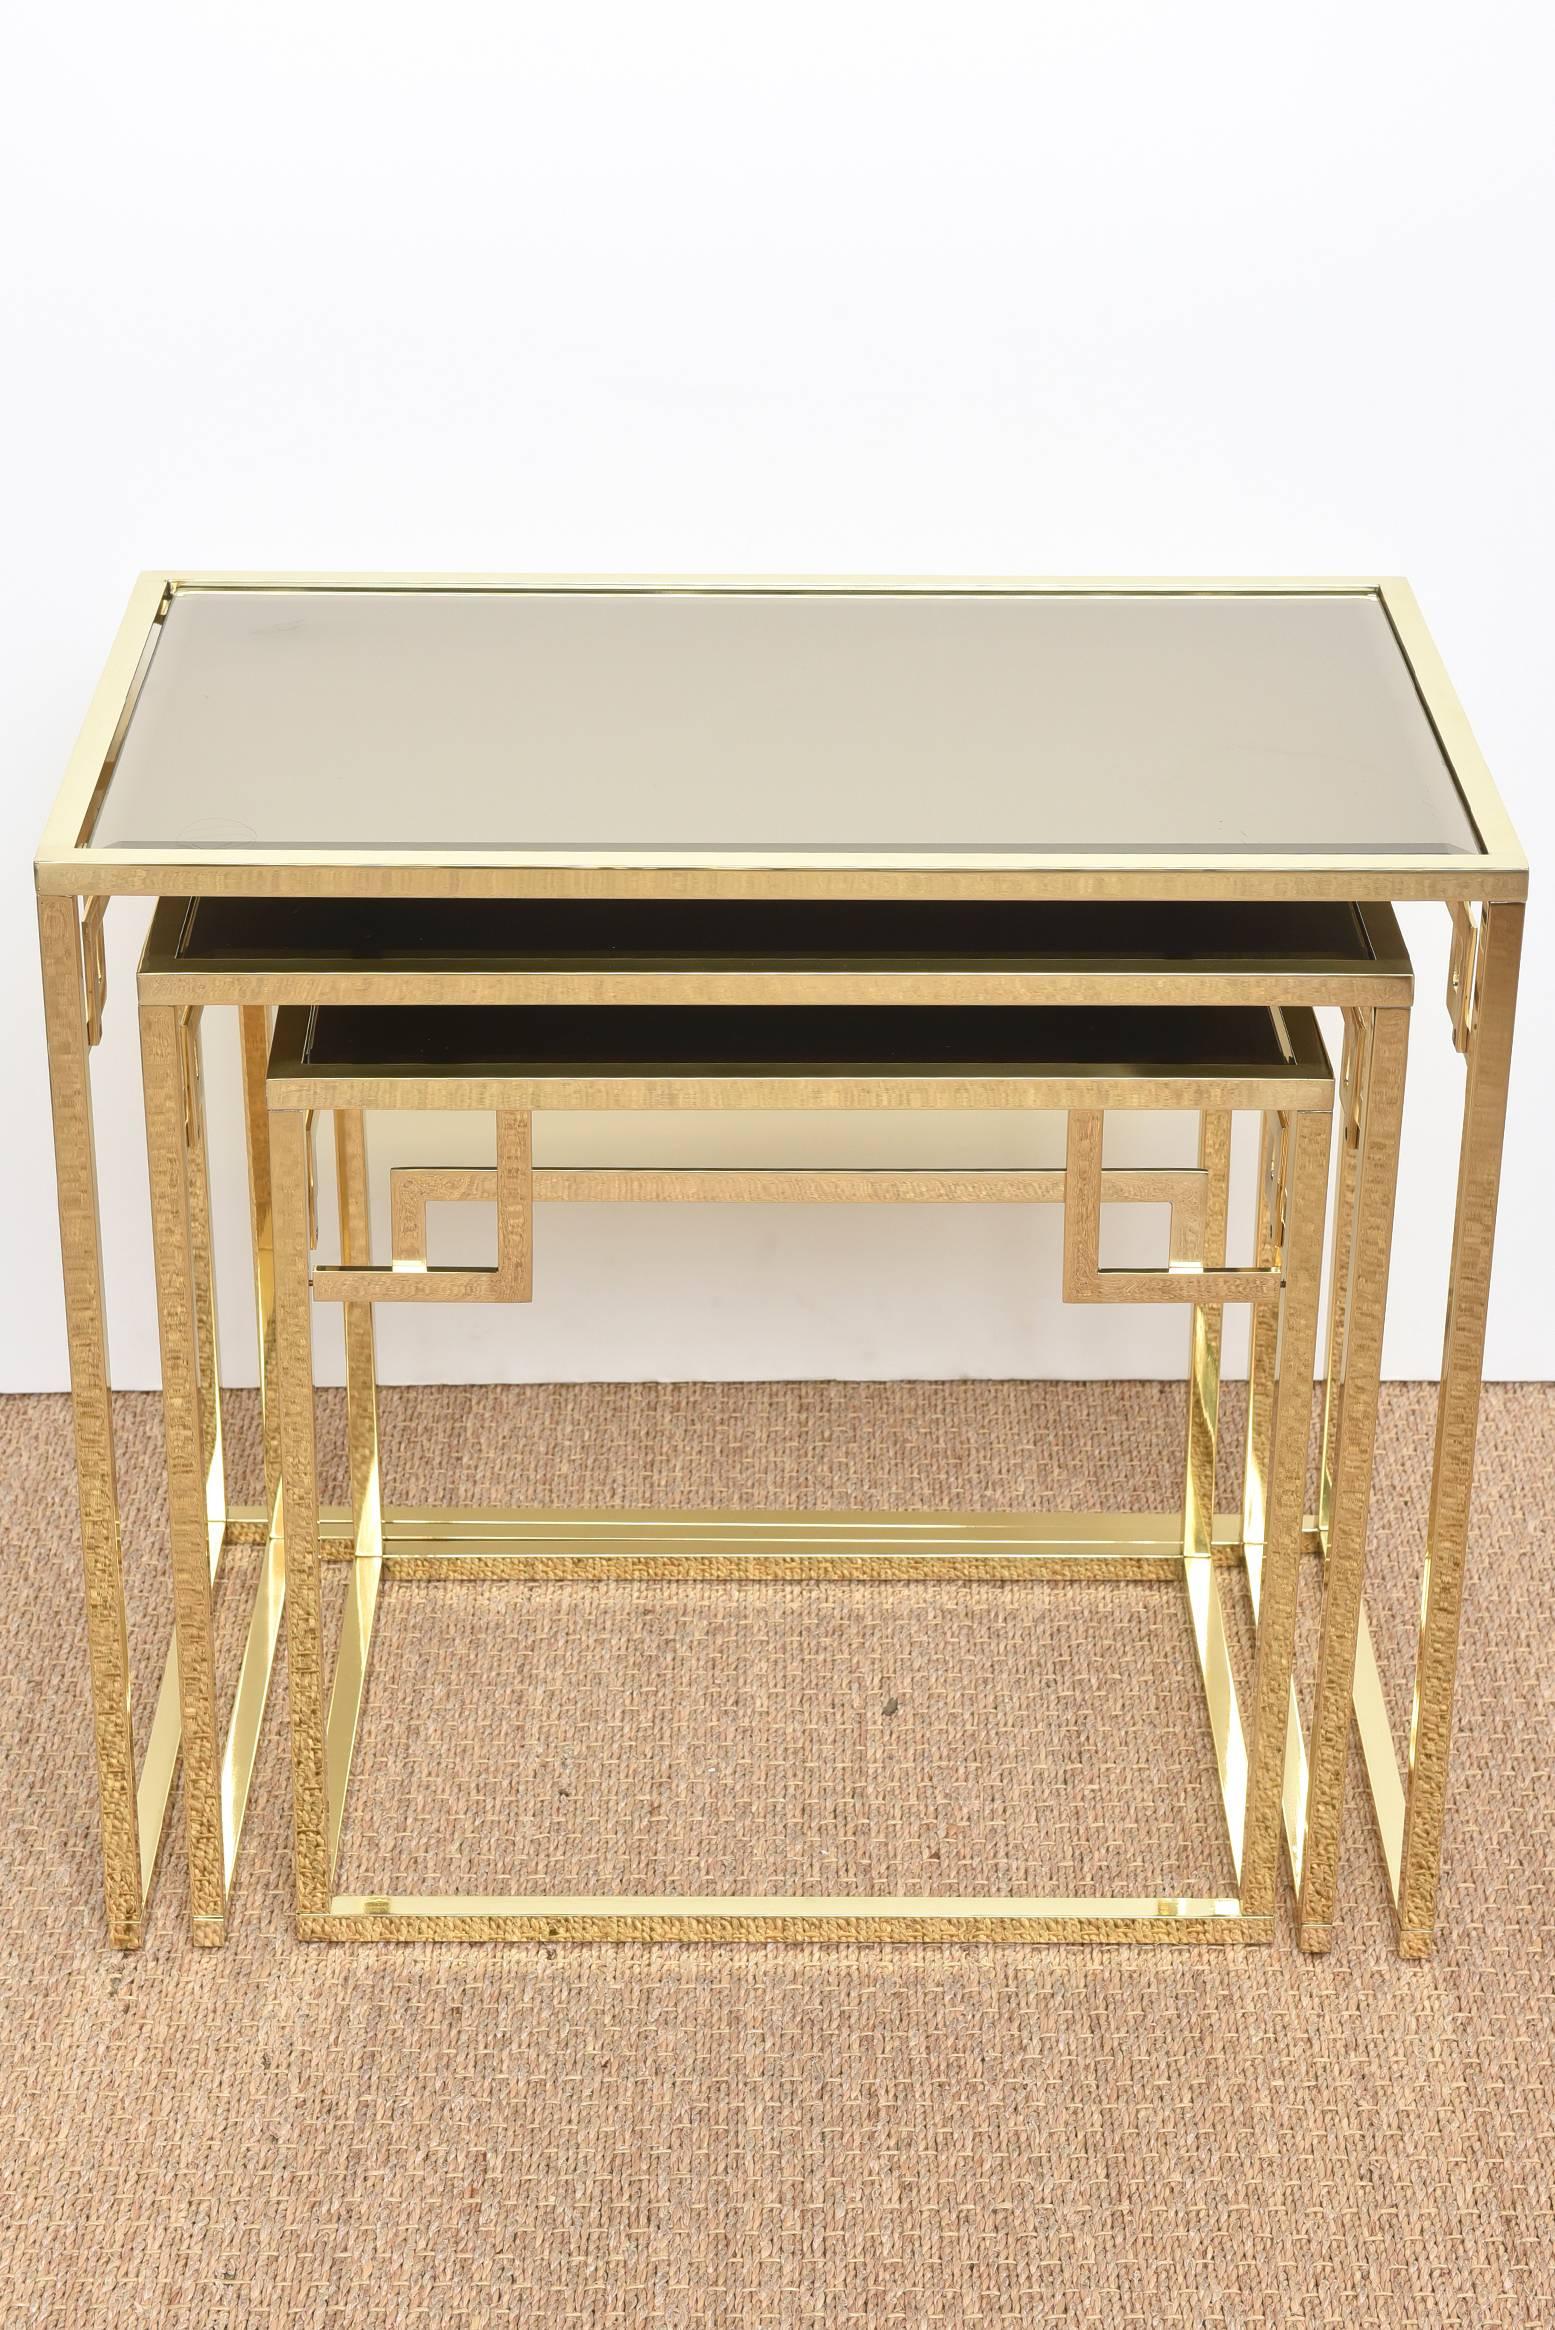 Italian Vintage Brass and Glass Greek Key Nesting Tables Set of Three In Good Condition For Sale In North Miami, FL